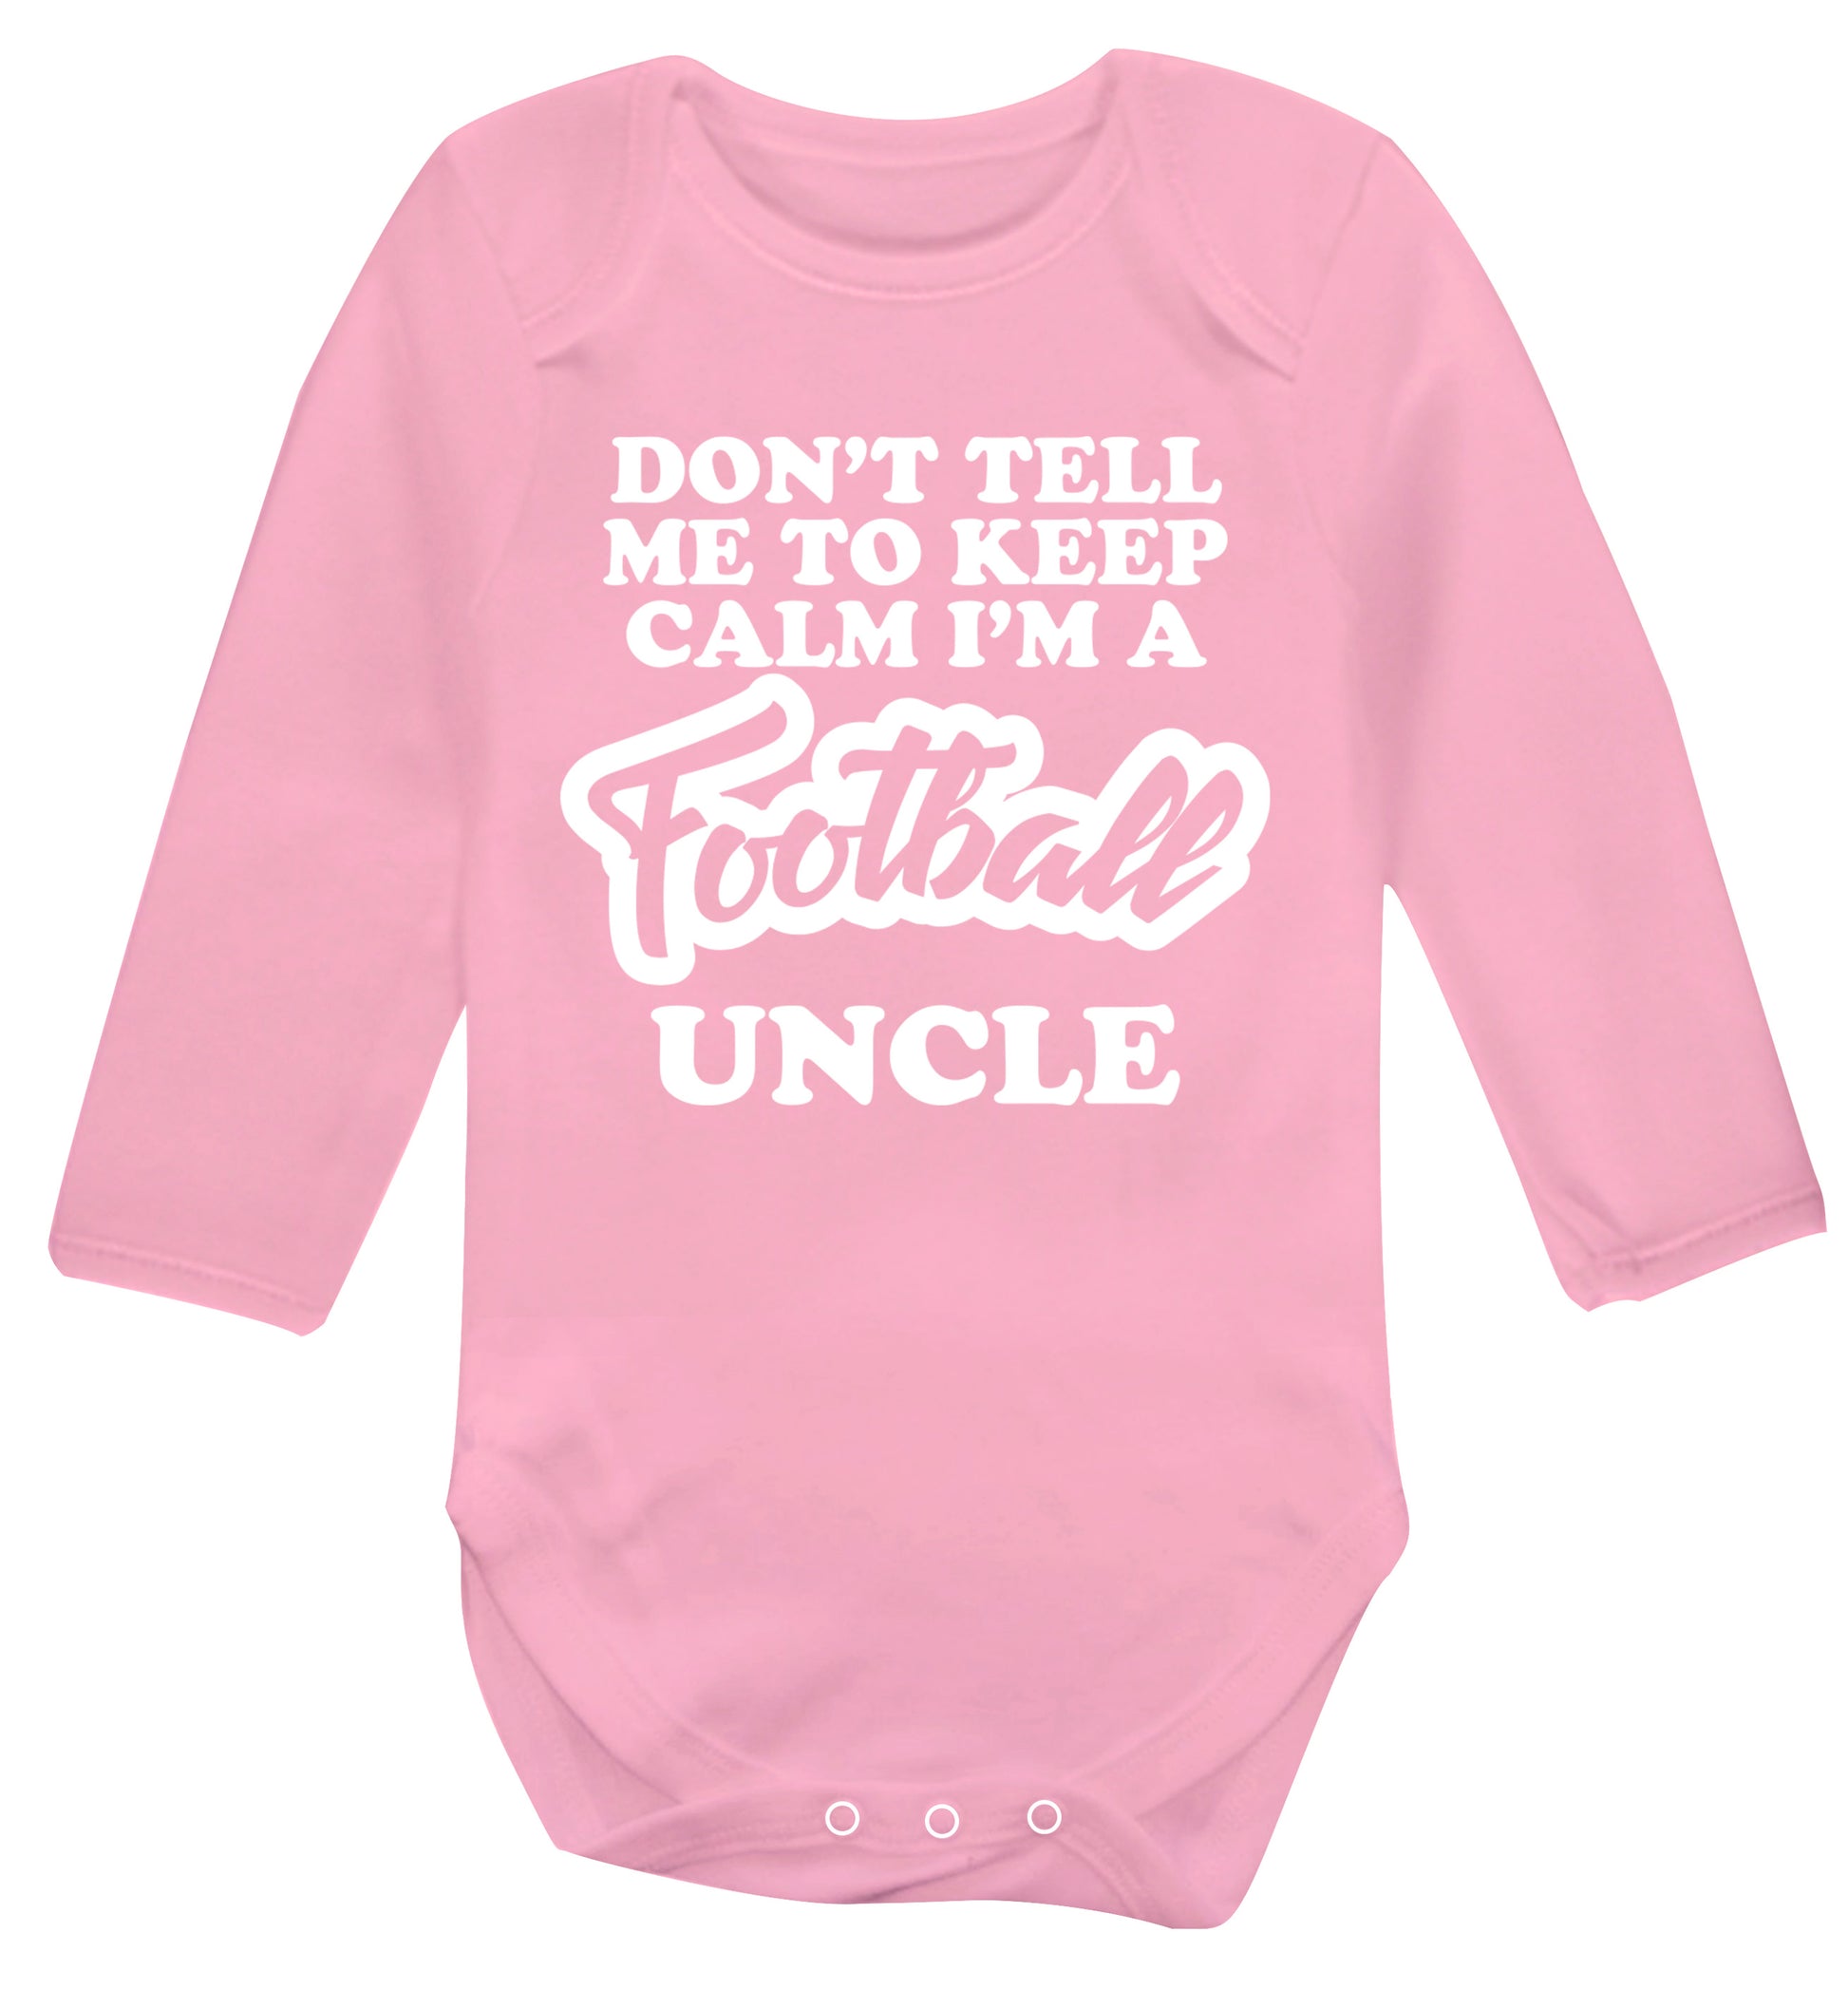 Don't tell me to keep calm I'm a football uncle Baby Vest long sleeved pale pink 6-12 months